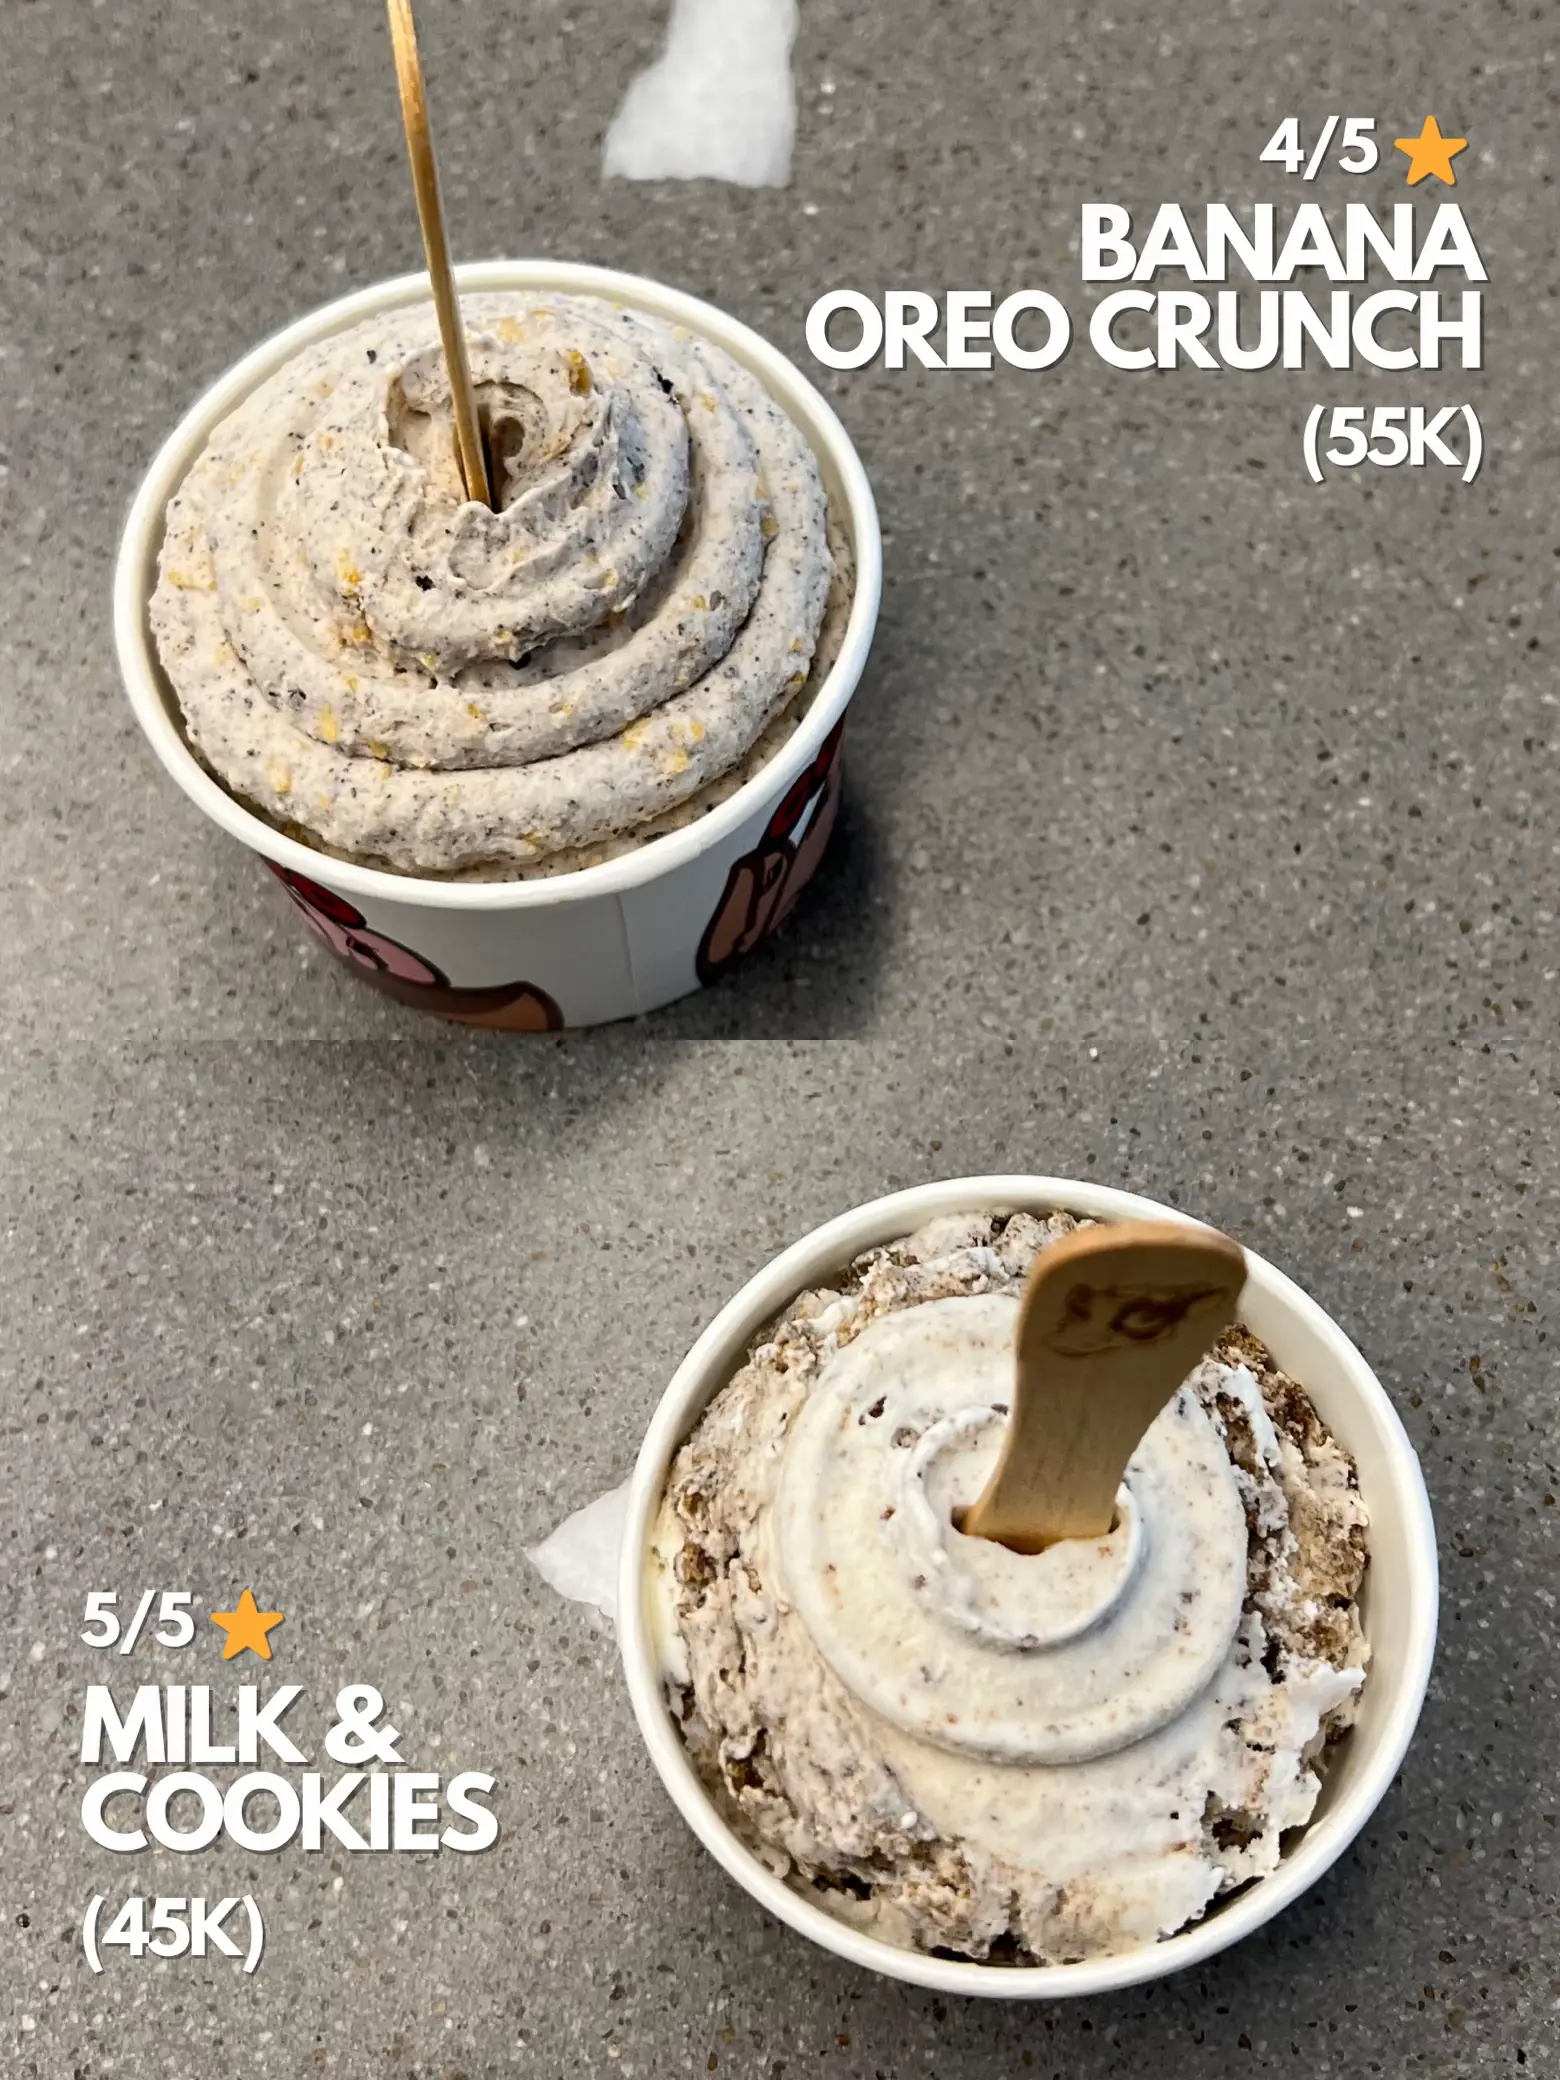 Sonic's New Big Scoop Cookie Dough Blast Is Available Now